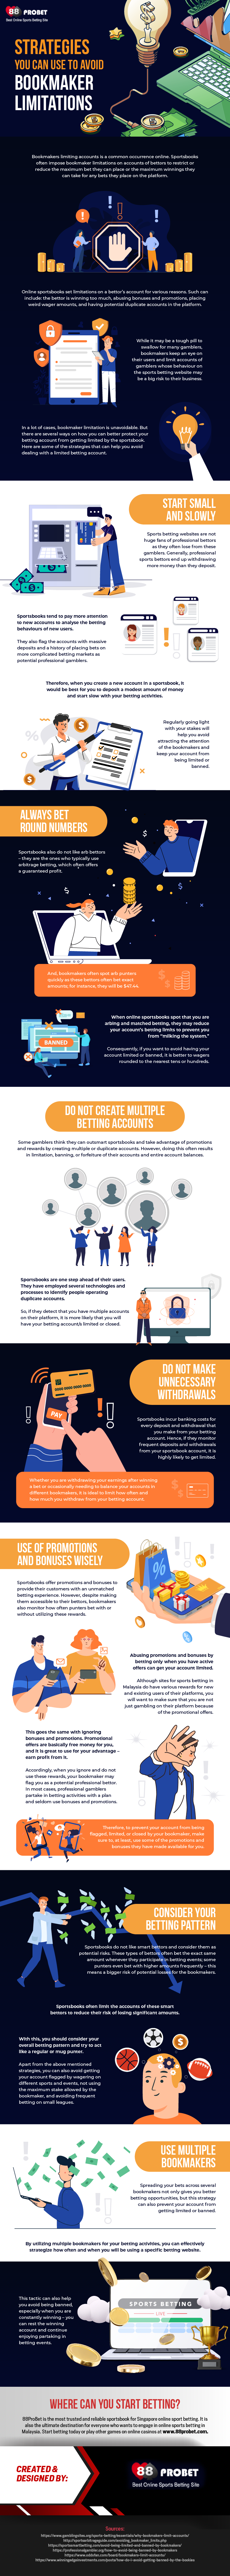 Strategies-You-Can-Use-to-Avoid-Bookmaker-Limitations-sports-betting-singapore-malaysia-infographic